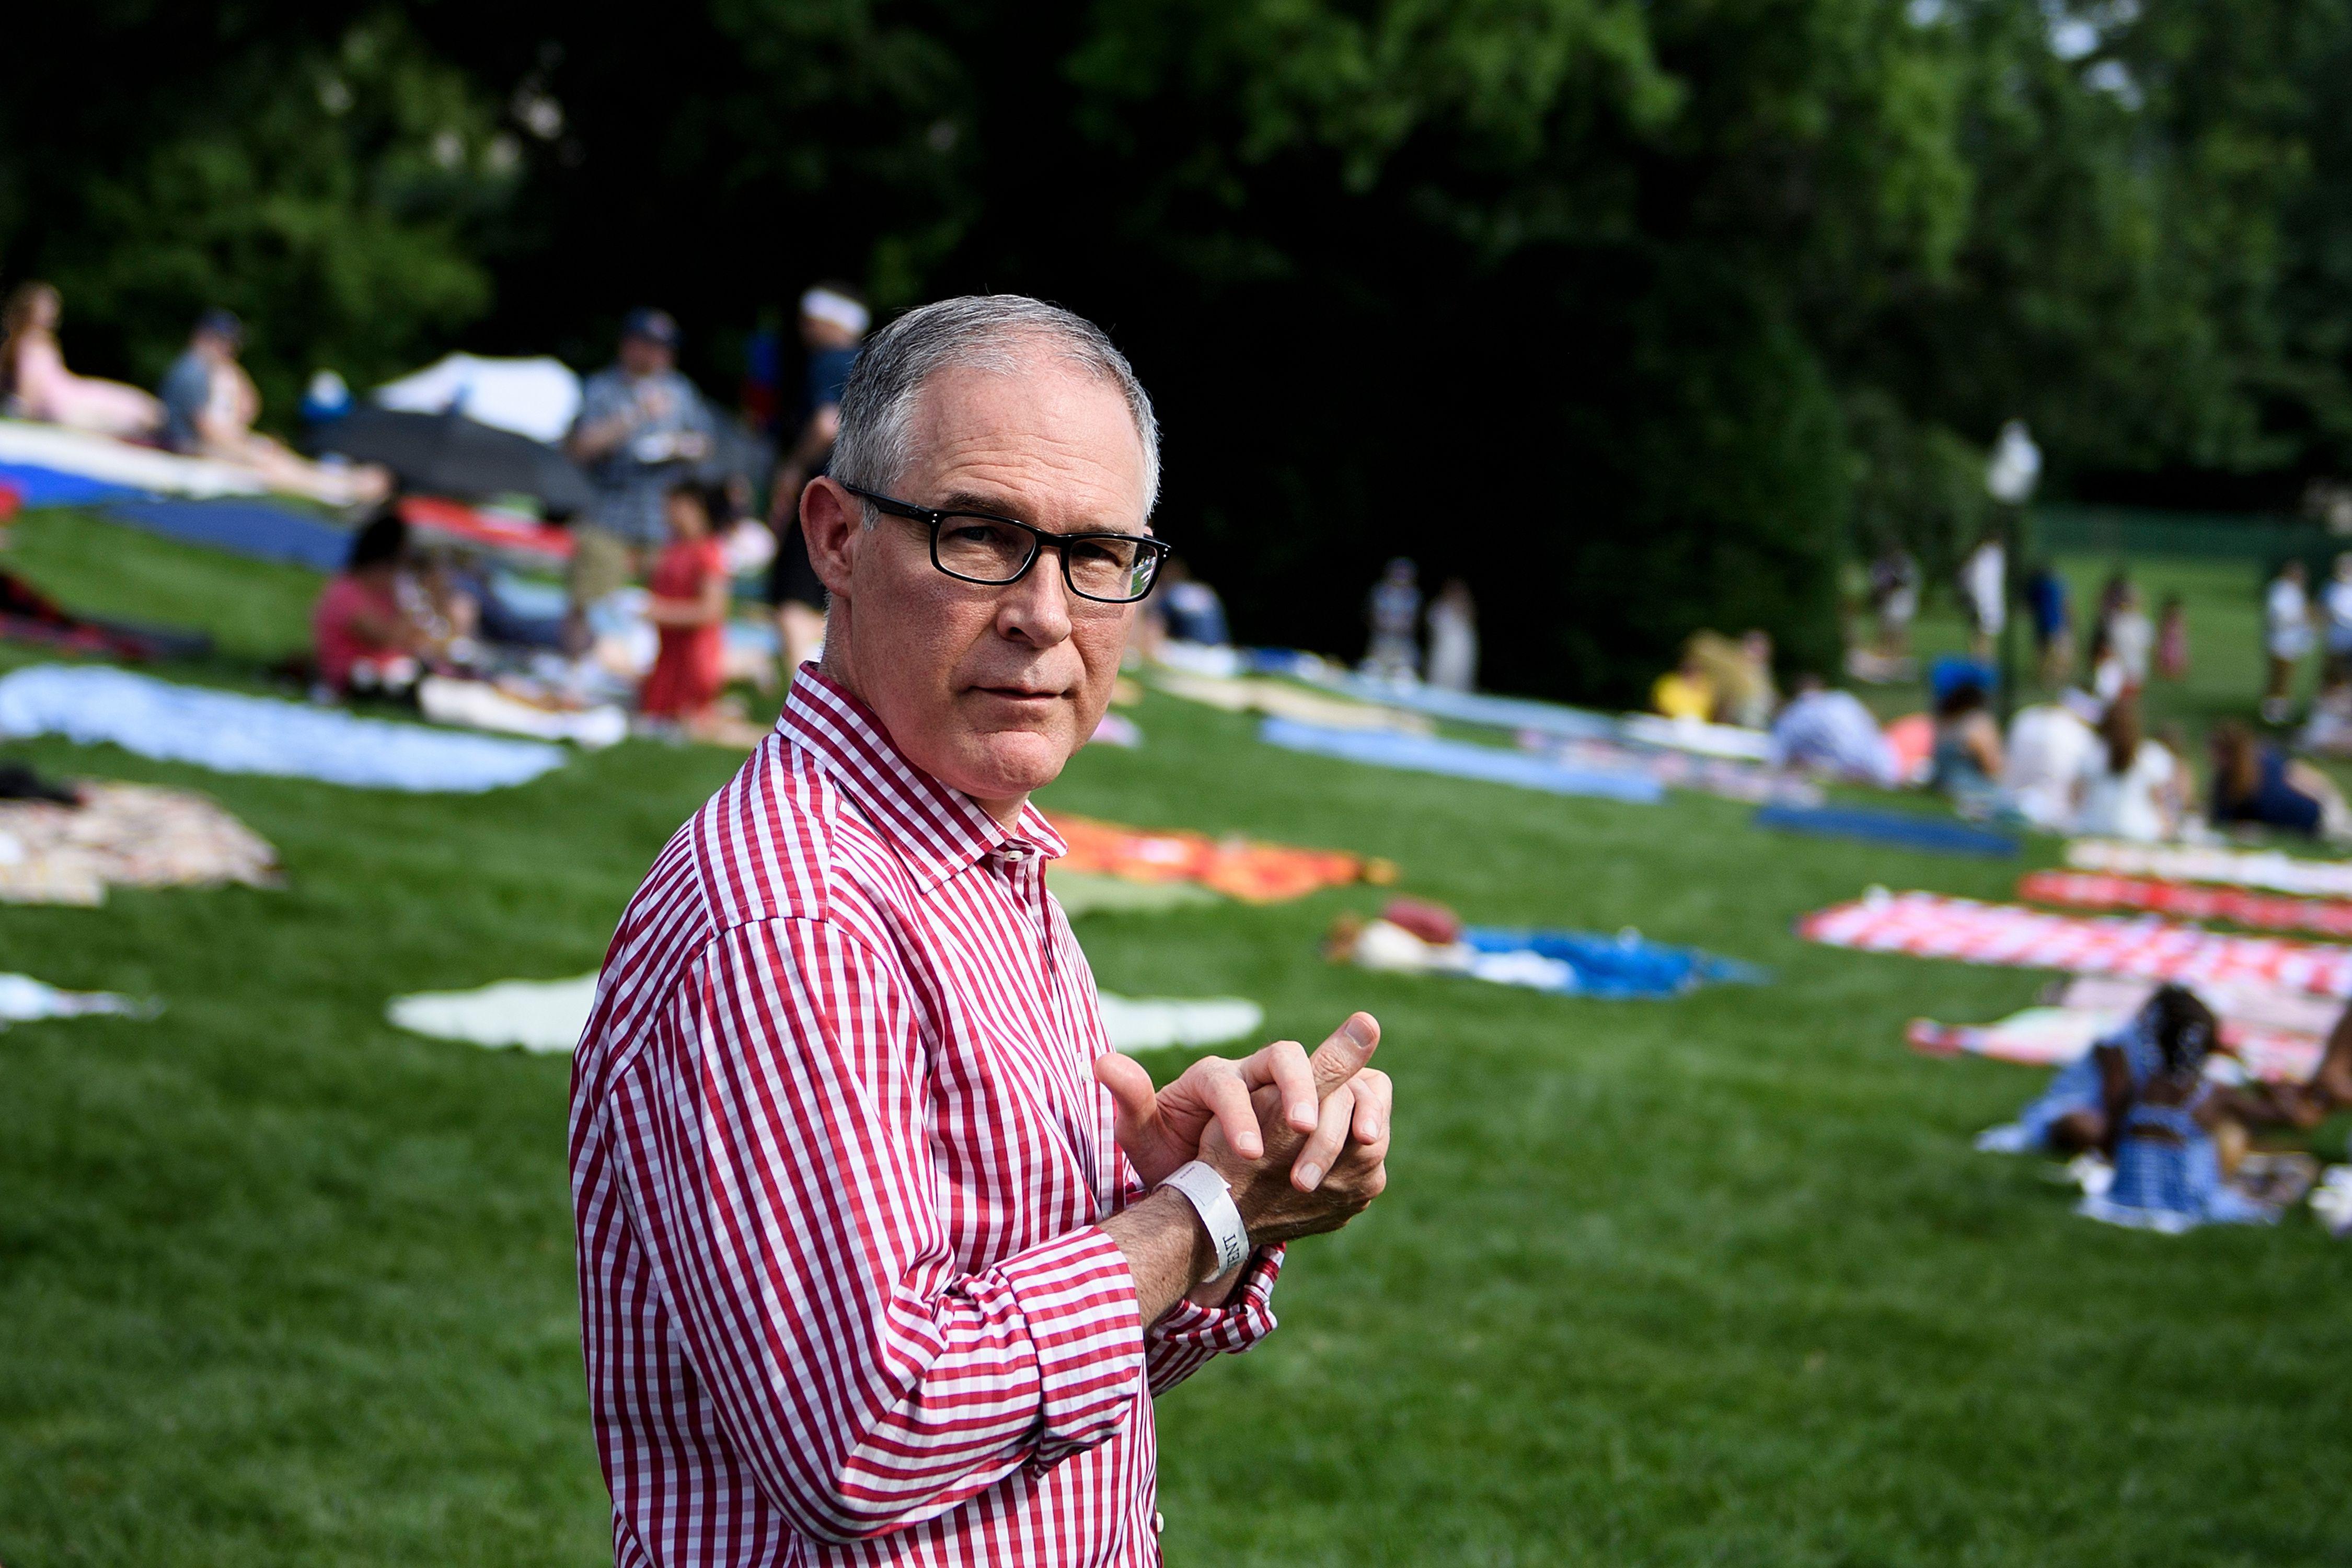 Environmental Protection Agency Administrator Scott Pruitt walks during a picnic on the South Lawn of the White House July 4, 2018 in Washington, DC. 